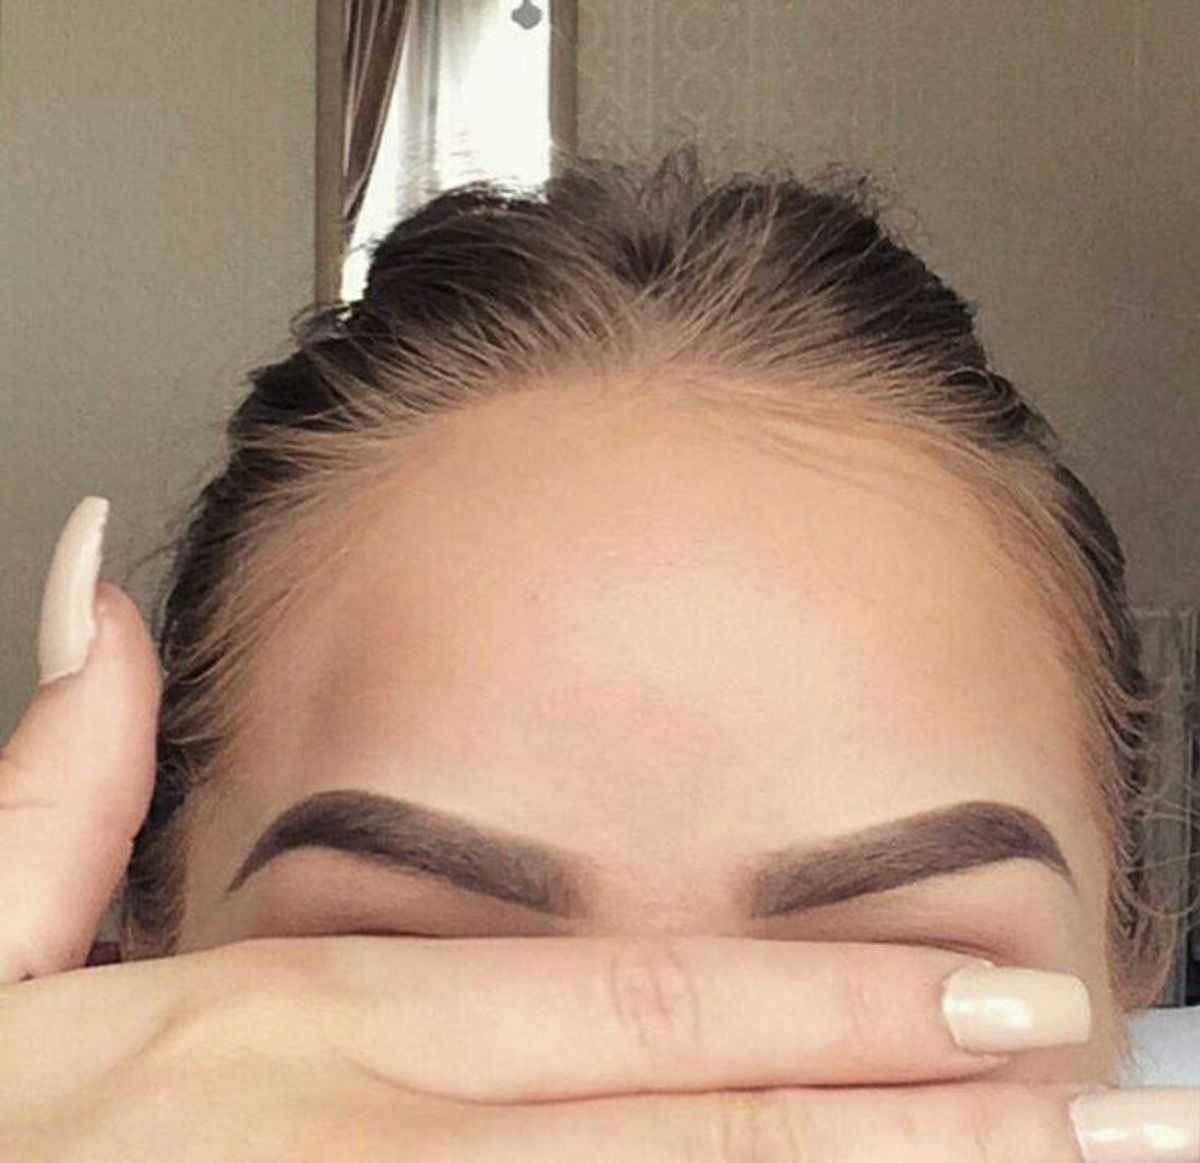 How Our Eyebrows Make Us Different